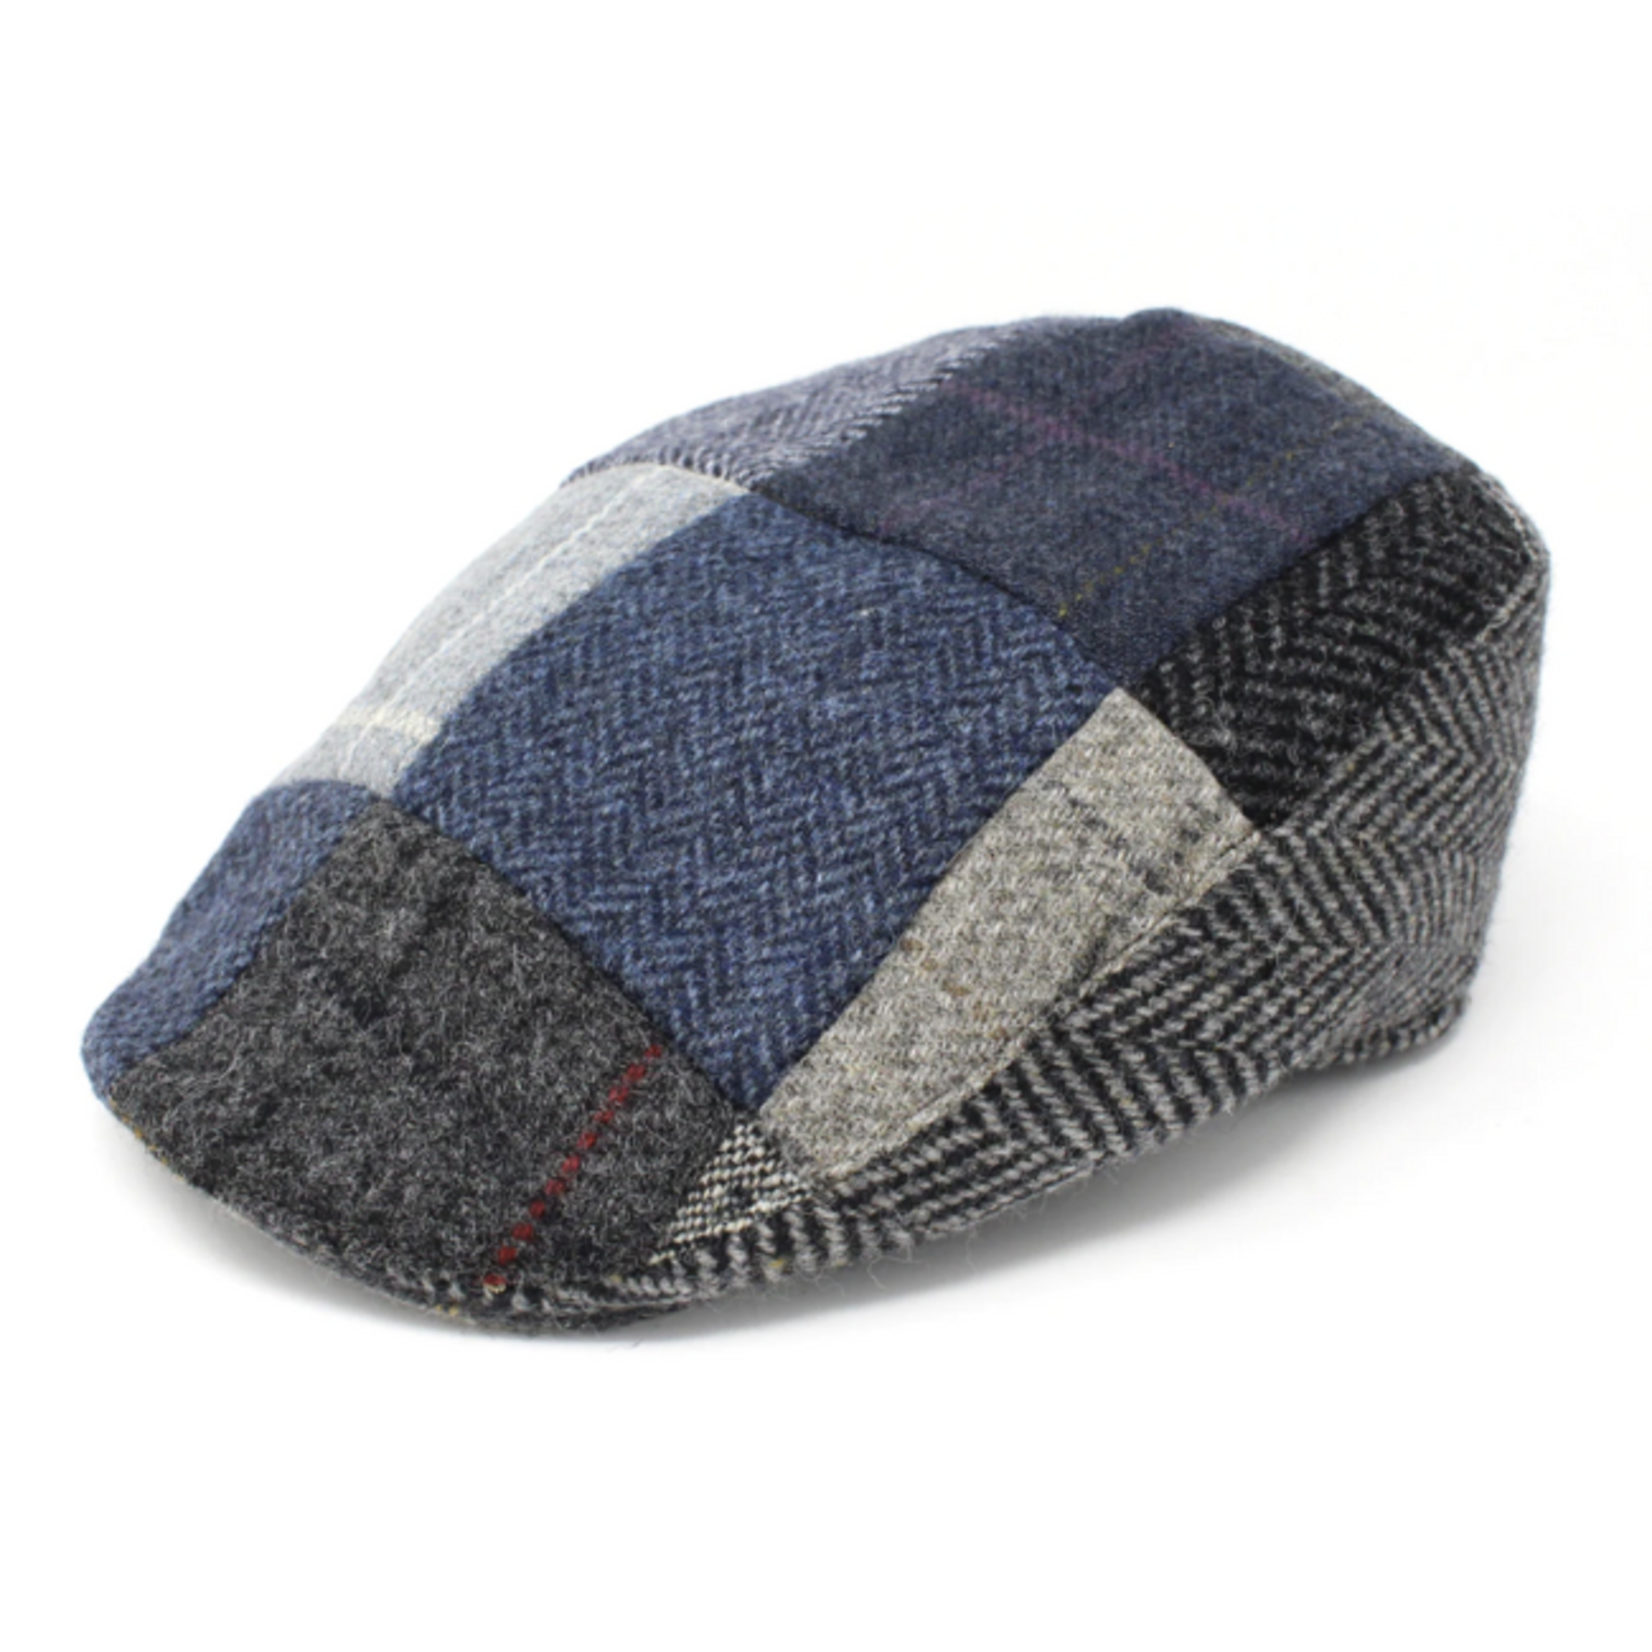 Hanna Hats Donegal Touring Cap Grey Patchwork